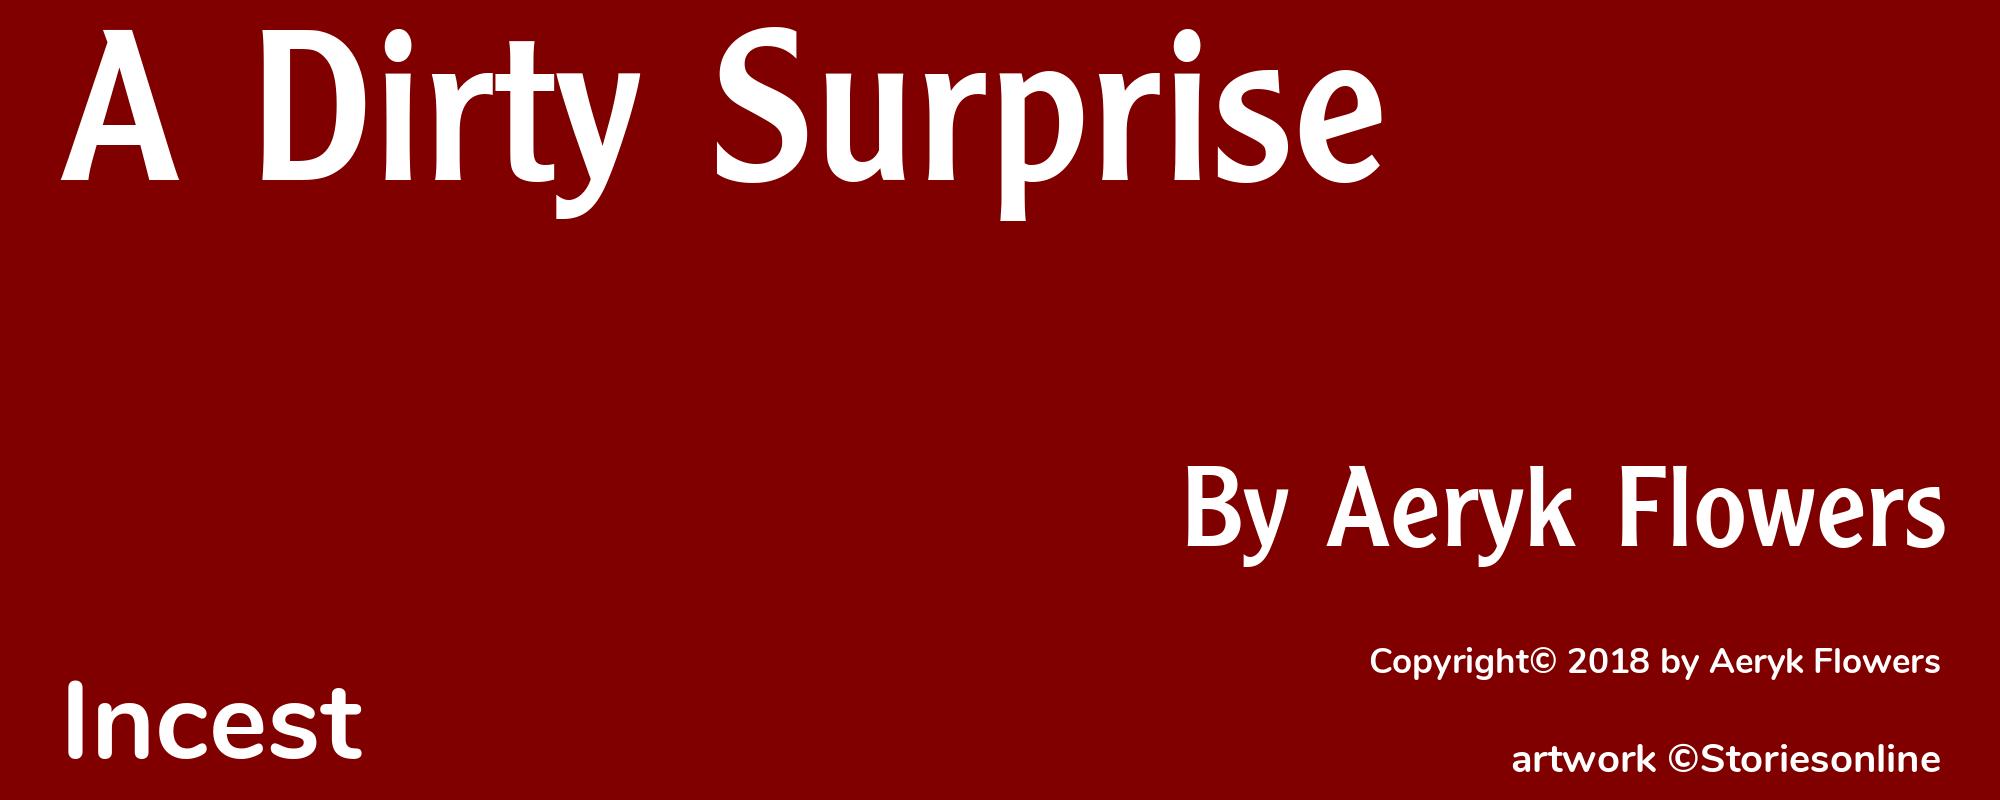 A Dirty Surprise - Cover